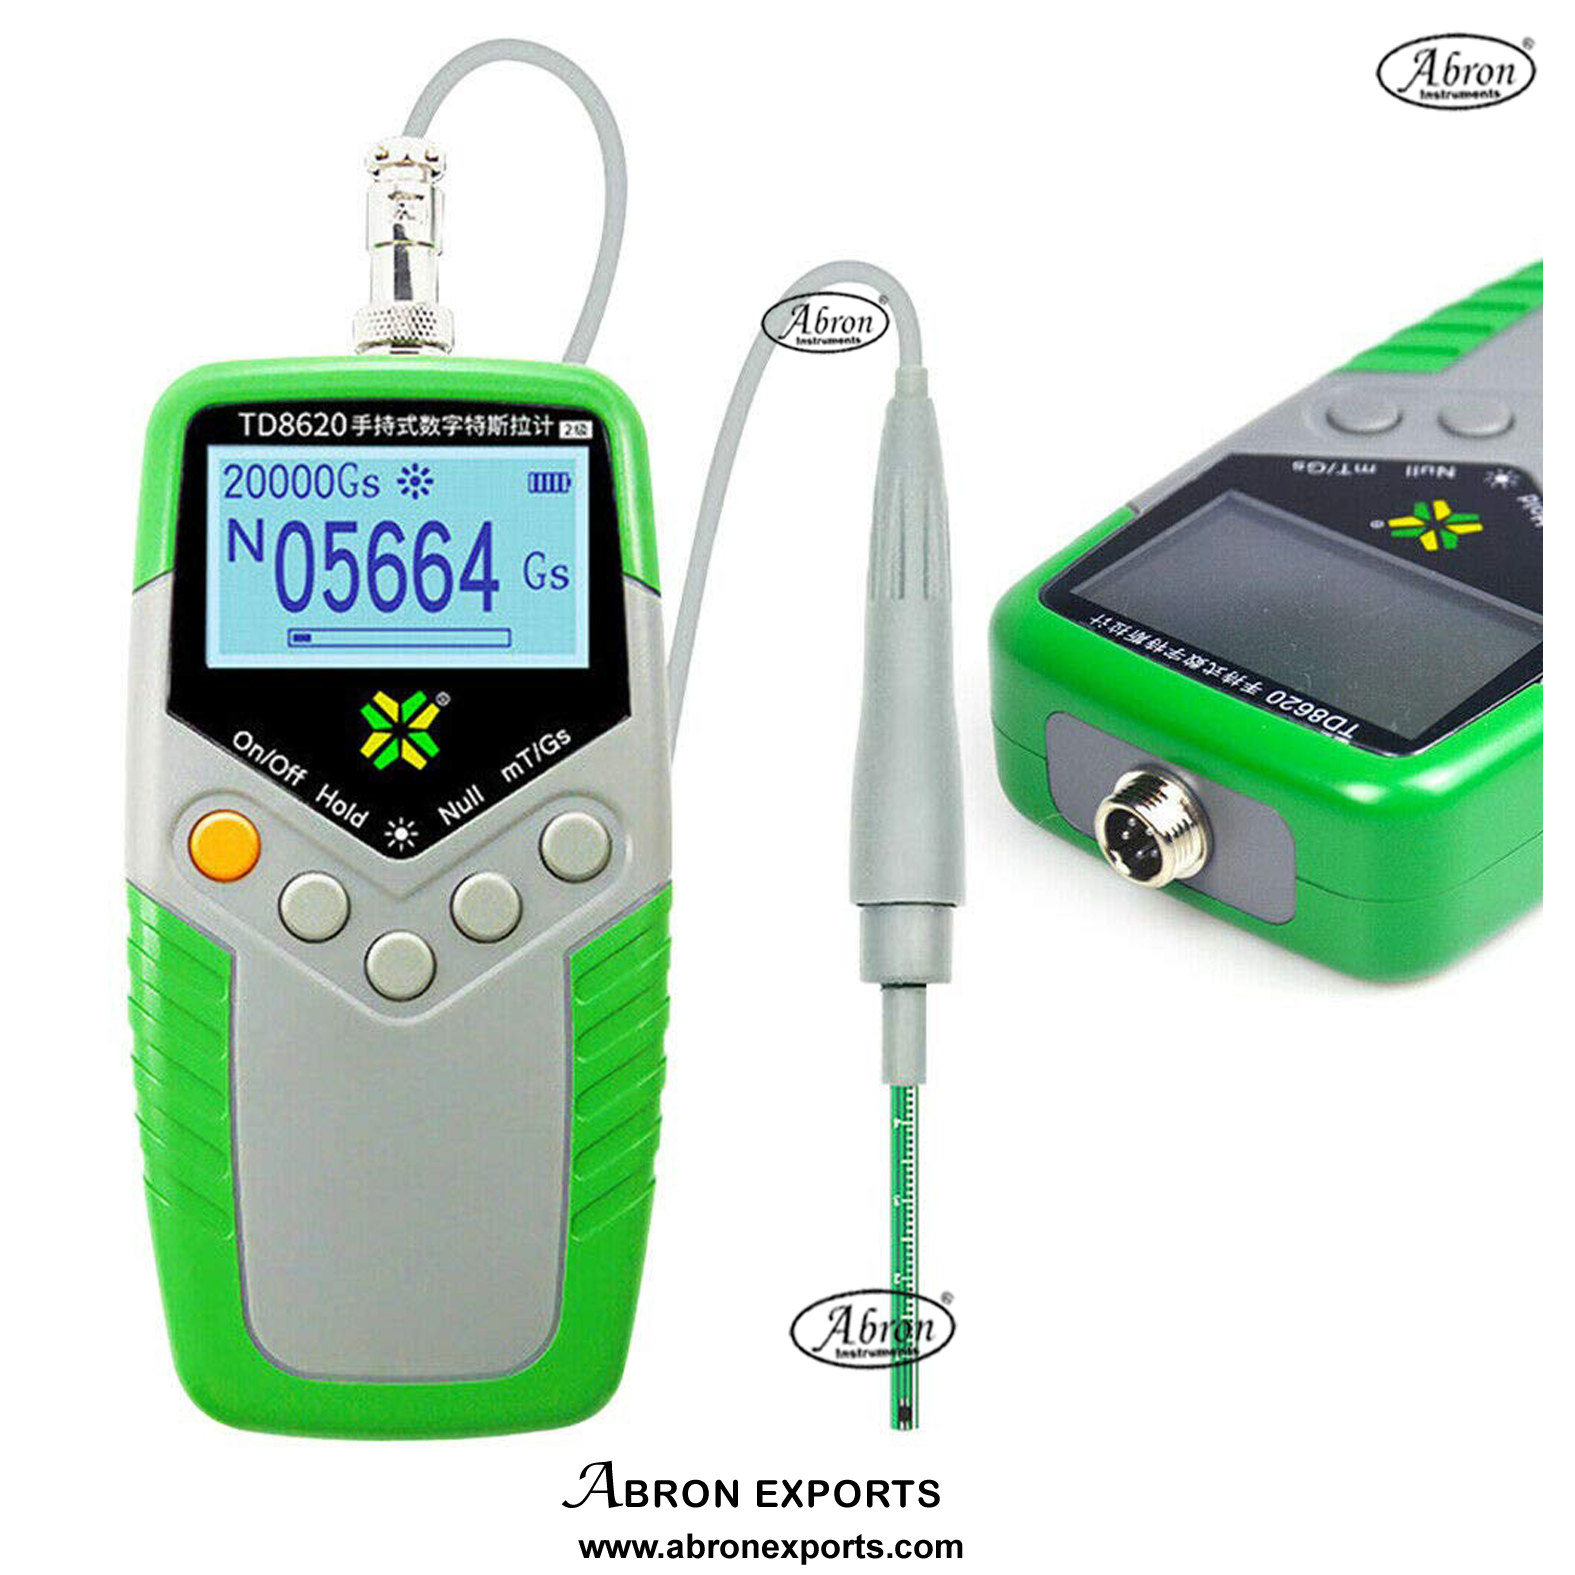 Guass meter with tal portable handy with probe AE-1224